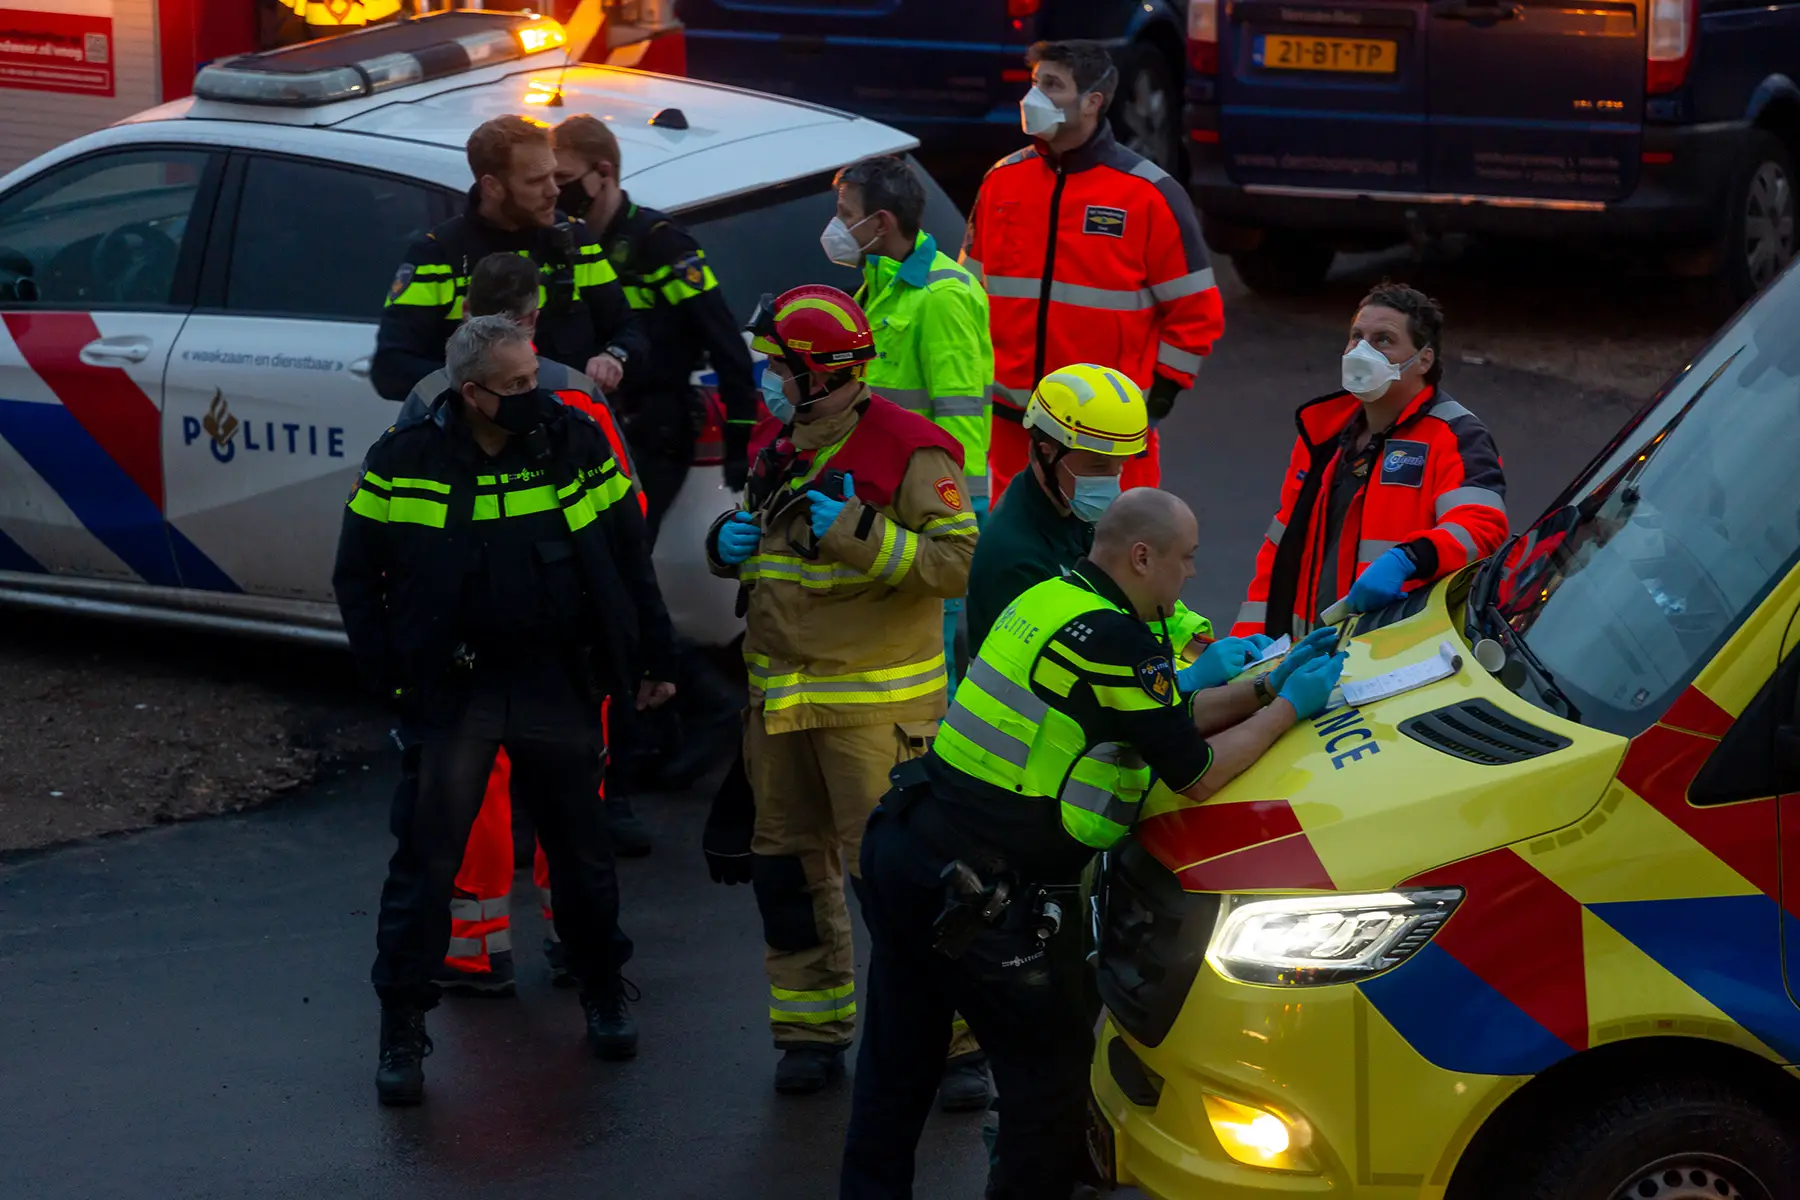 Police and ambulance responding to an accident in the Netherlands